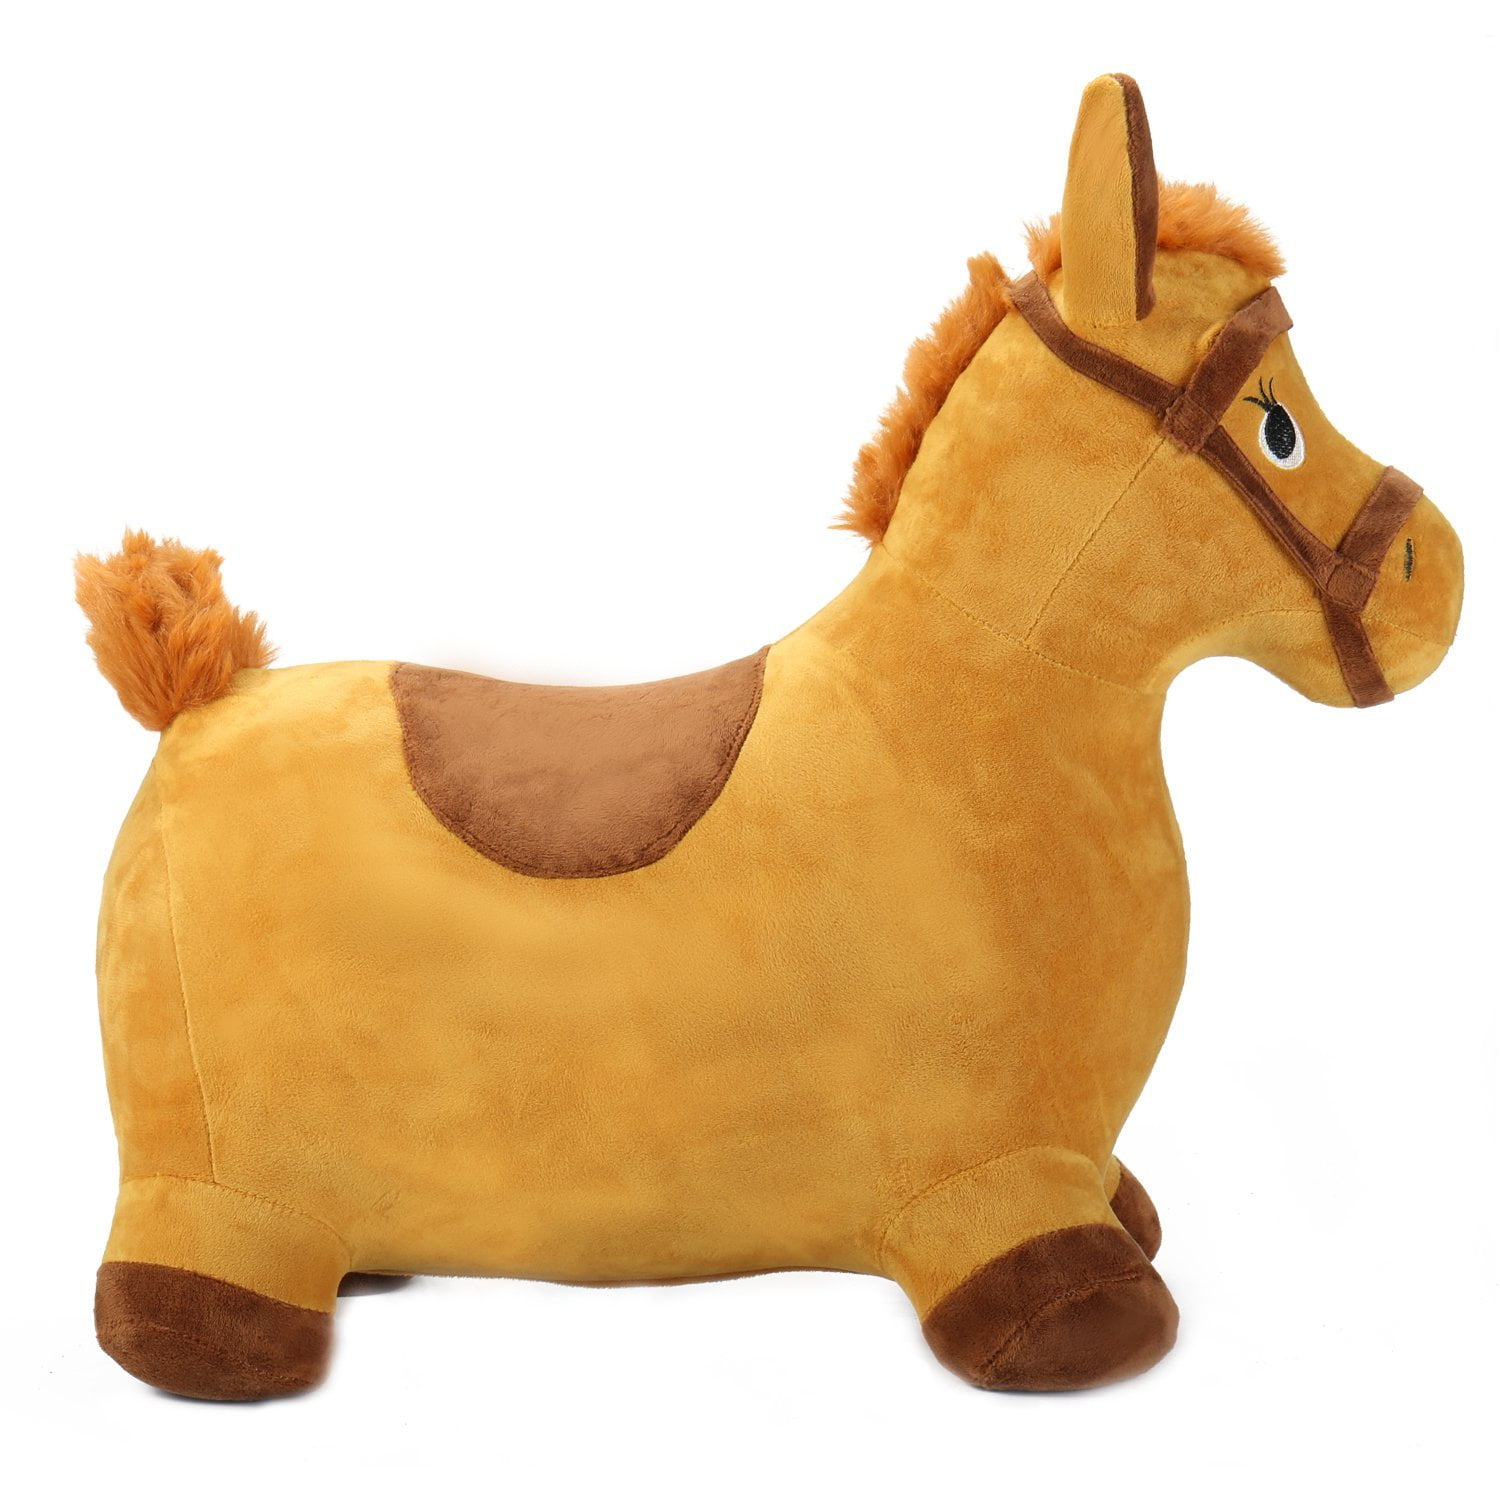 Yellow Hopping Horse Outdoors Ride on Bouncy Animal Play Toys Inflatable Hopper for sale online 